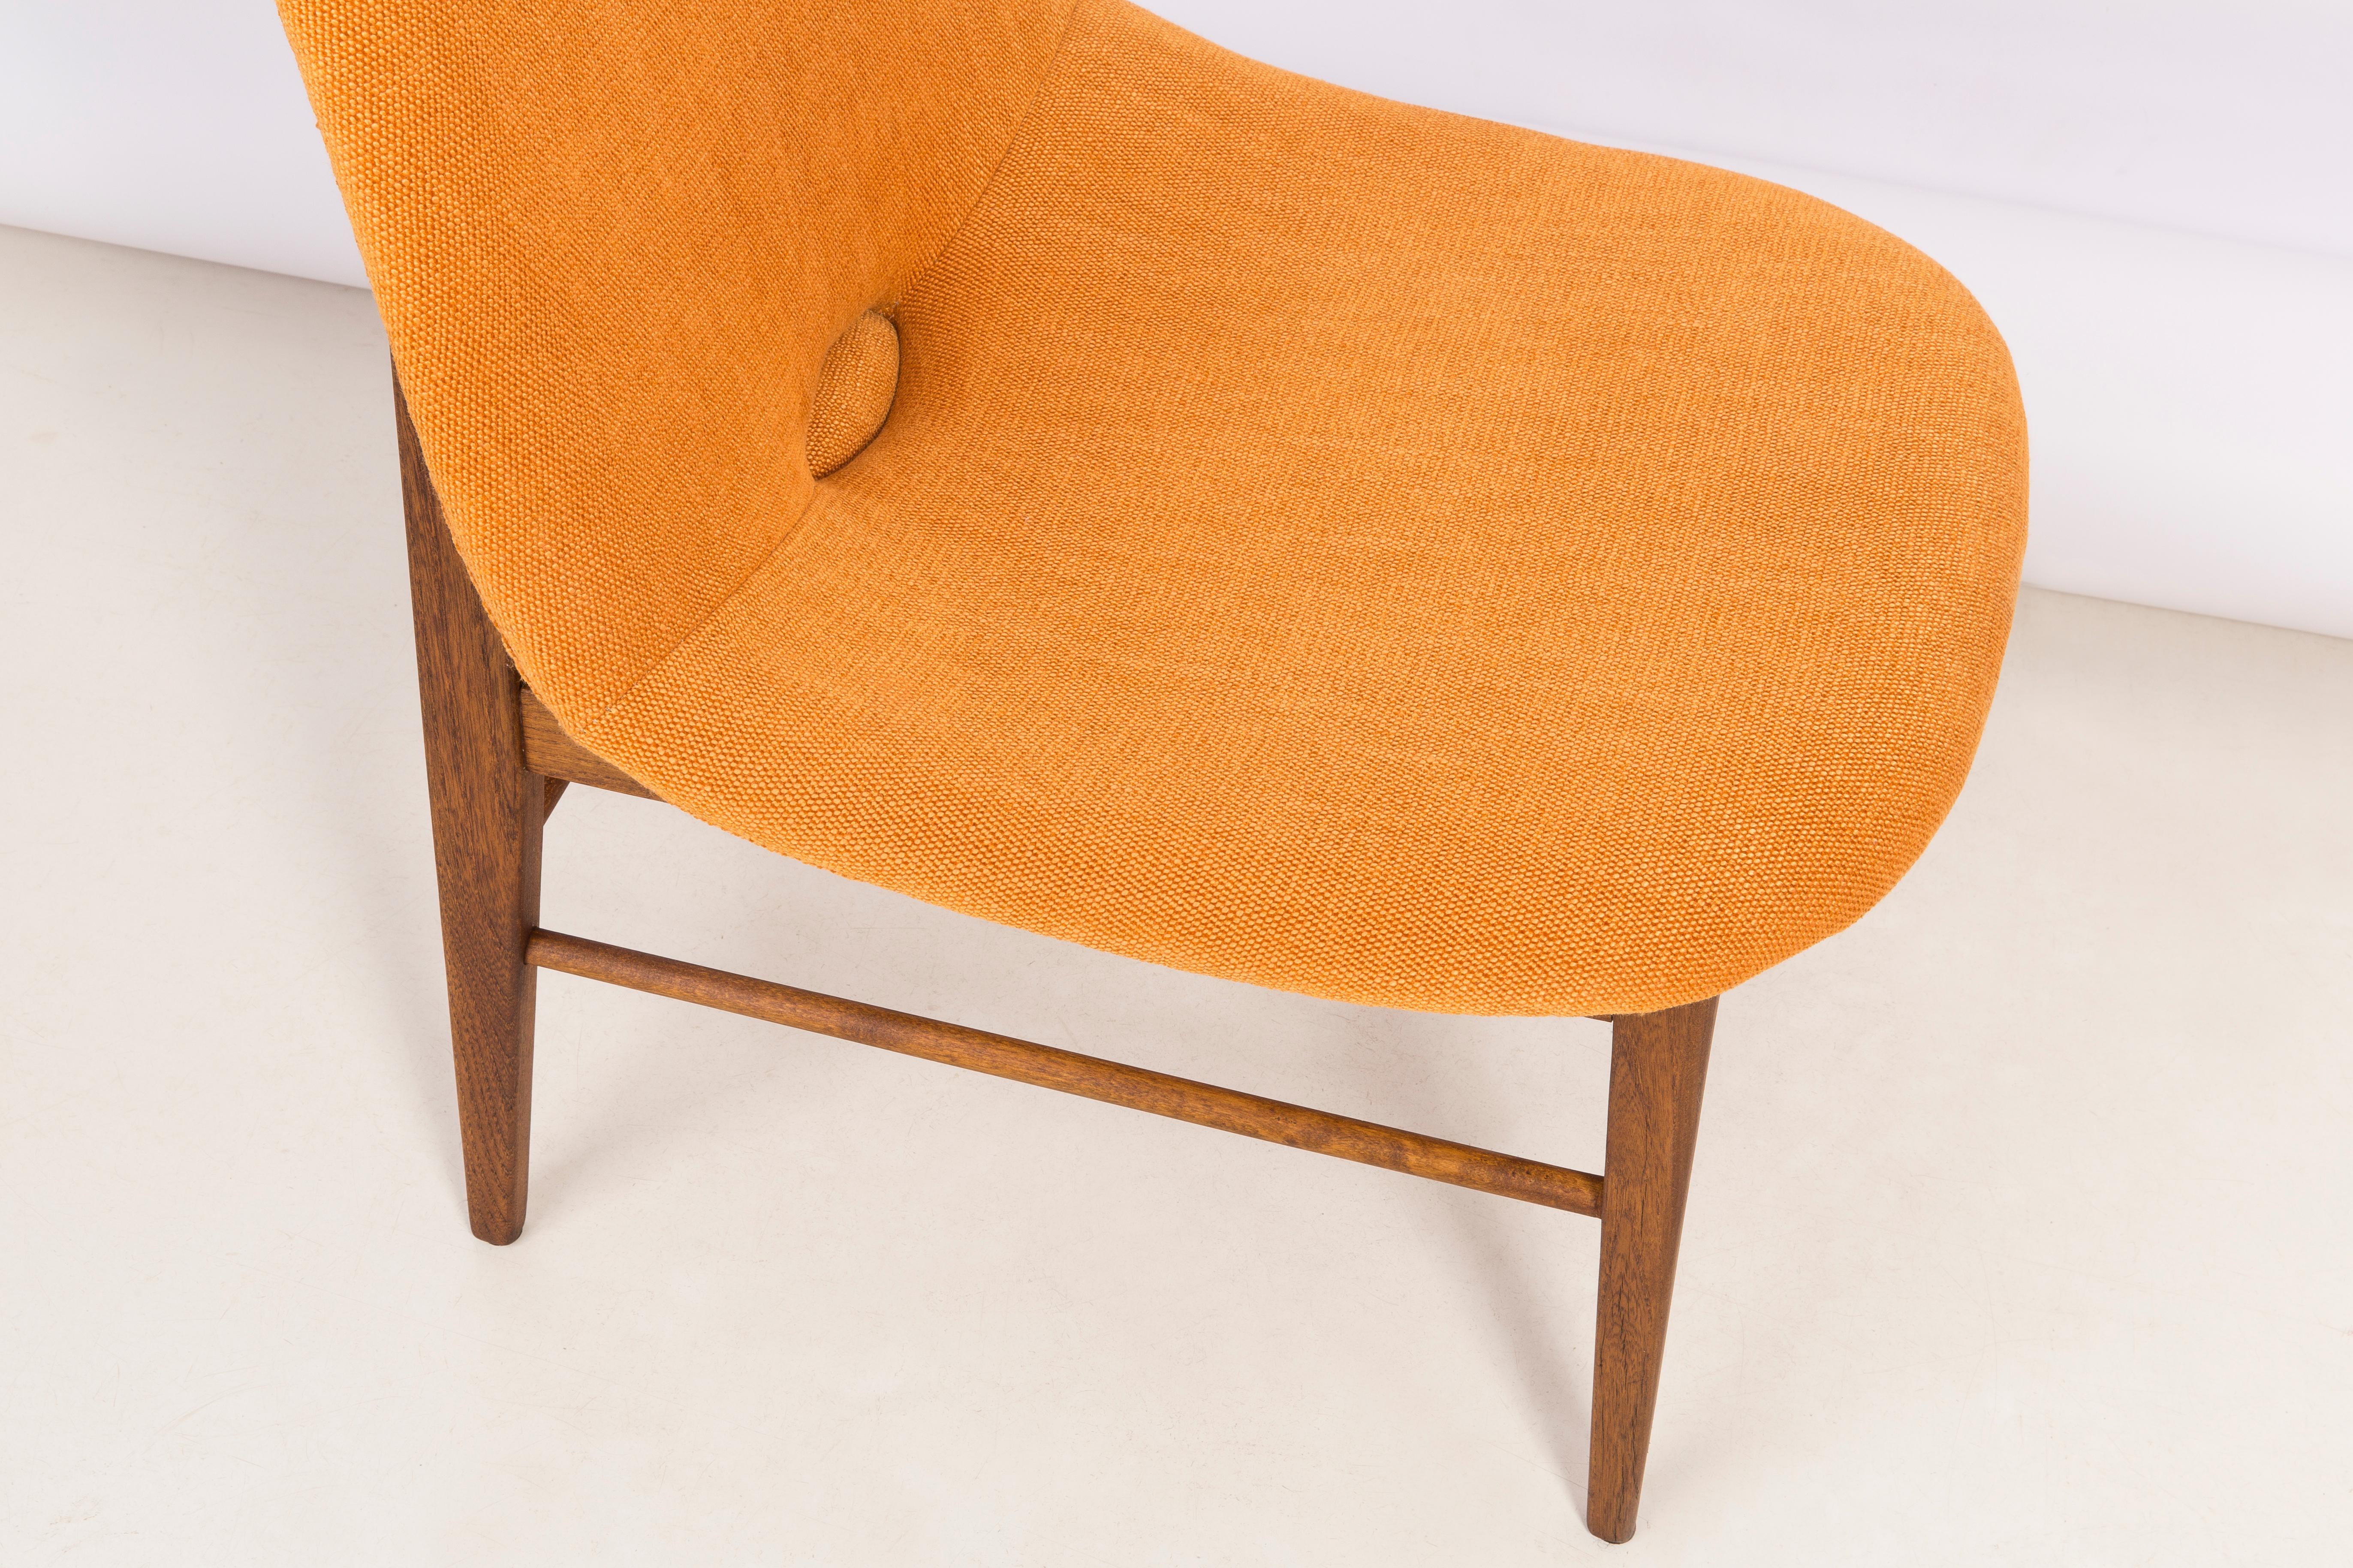 Set of Two Rare 20th Century Orange Shell Chairs, H. Lachert, 1960s For Sale 3